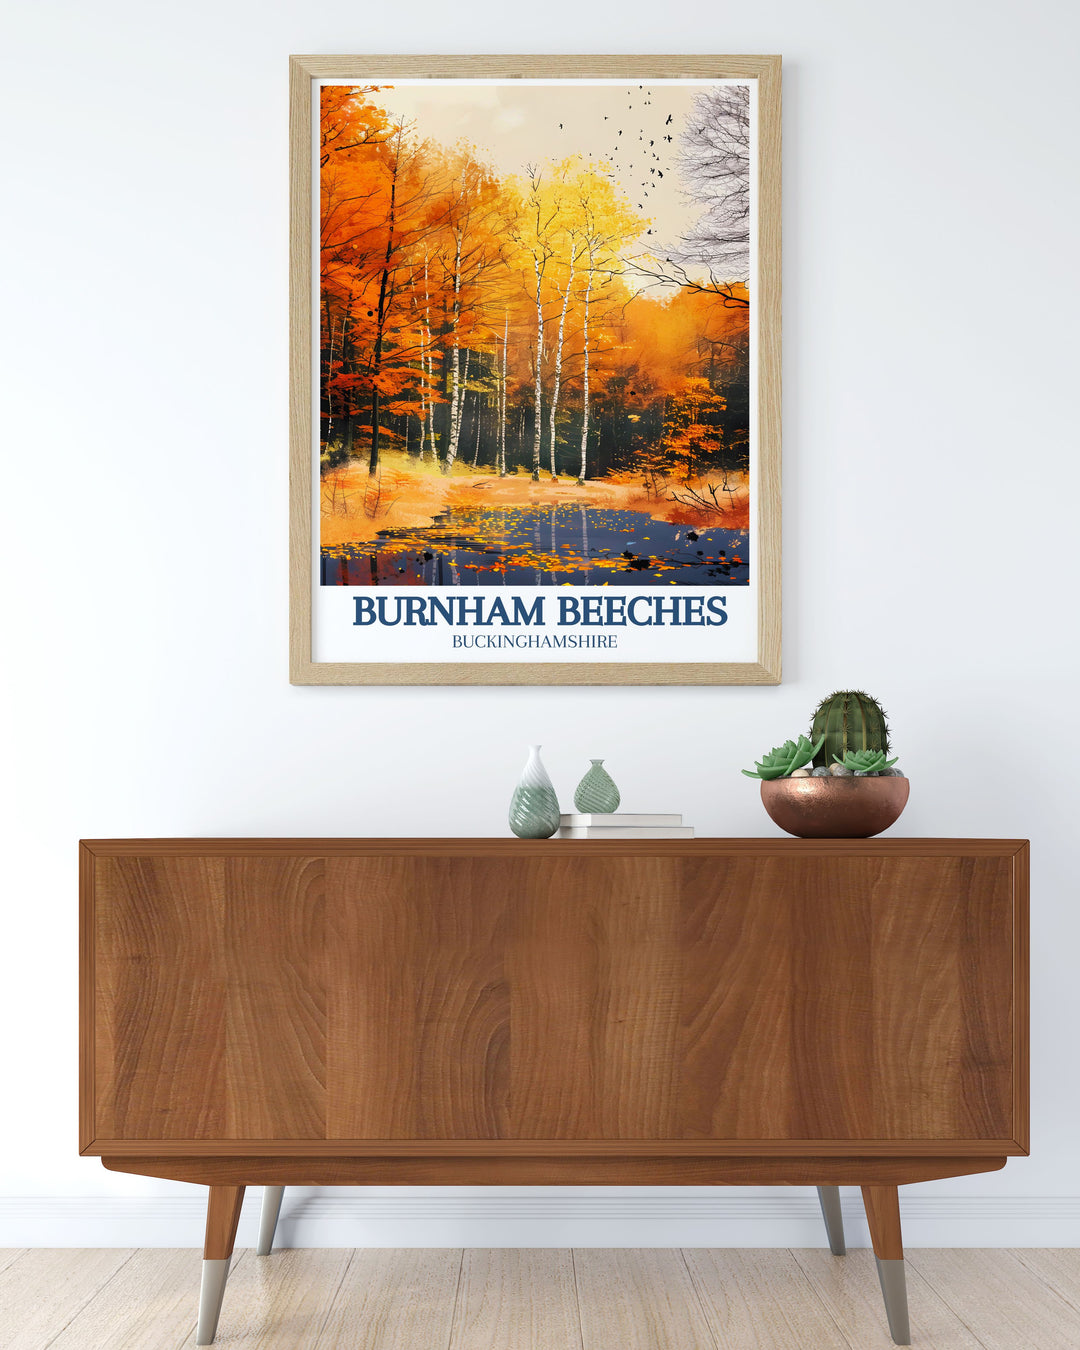 High quality print of Upper Pond and Farnham Common in Burnham Beeches, capturing the stunning landscapes and serene charm of this unique area. Ideal for art lovers who appreciate both nature and history.